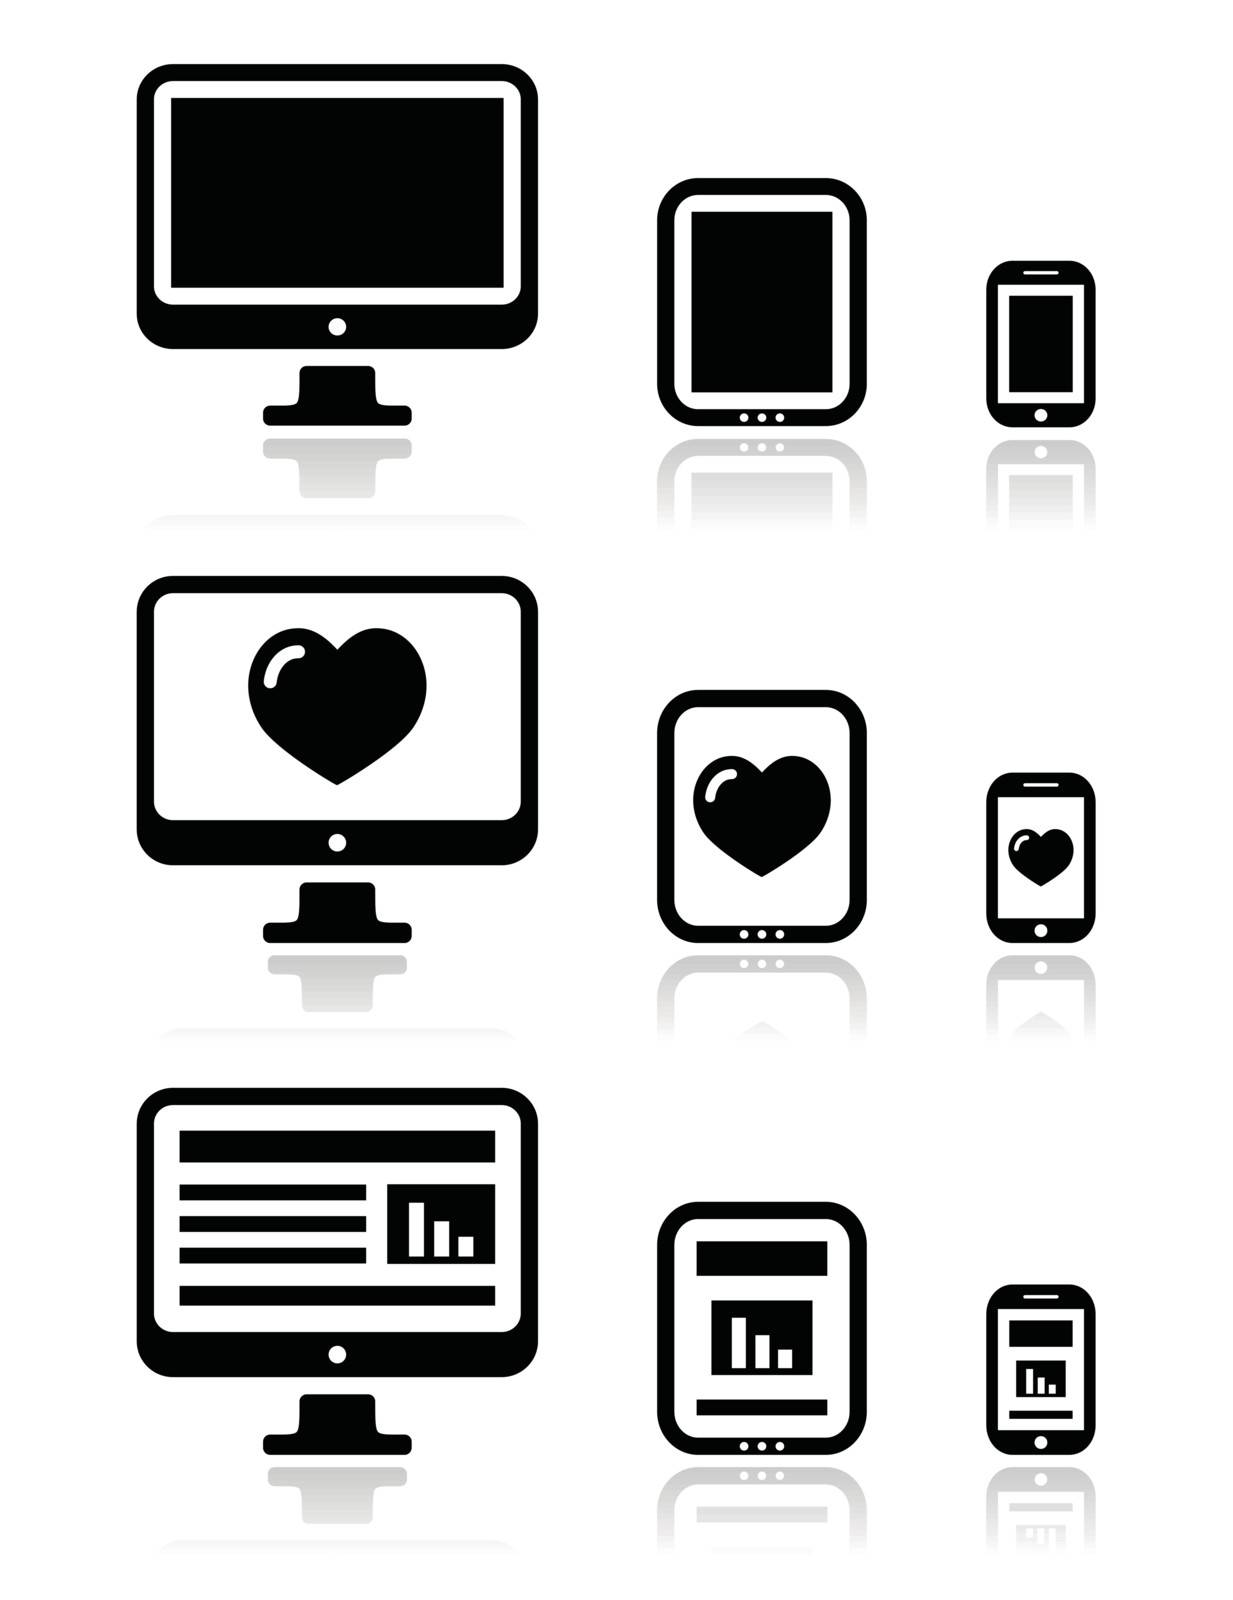 Responsive website design - computer screen, mobile, tablet icons set by RedKoala